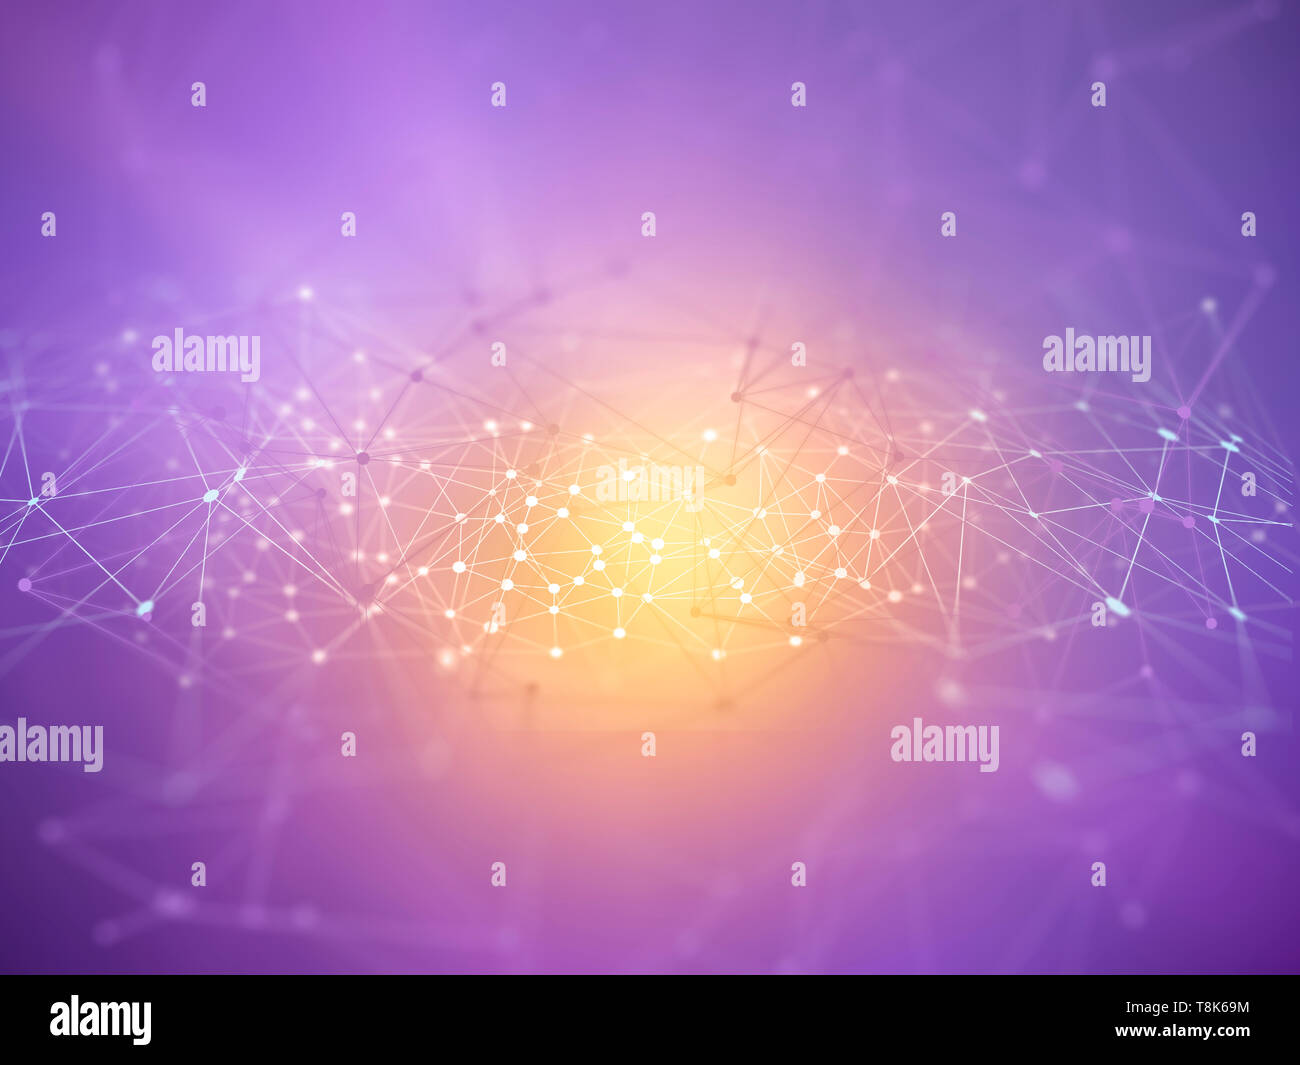 Modern technology background of connecting lines and dots Stock Photo